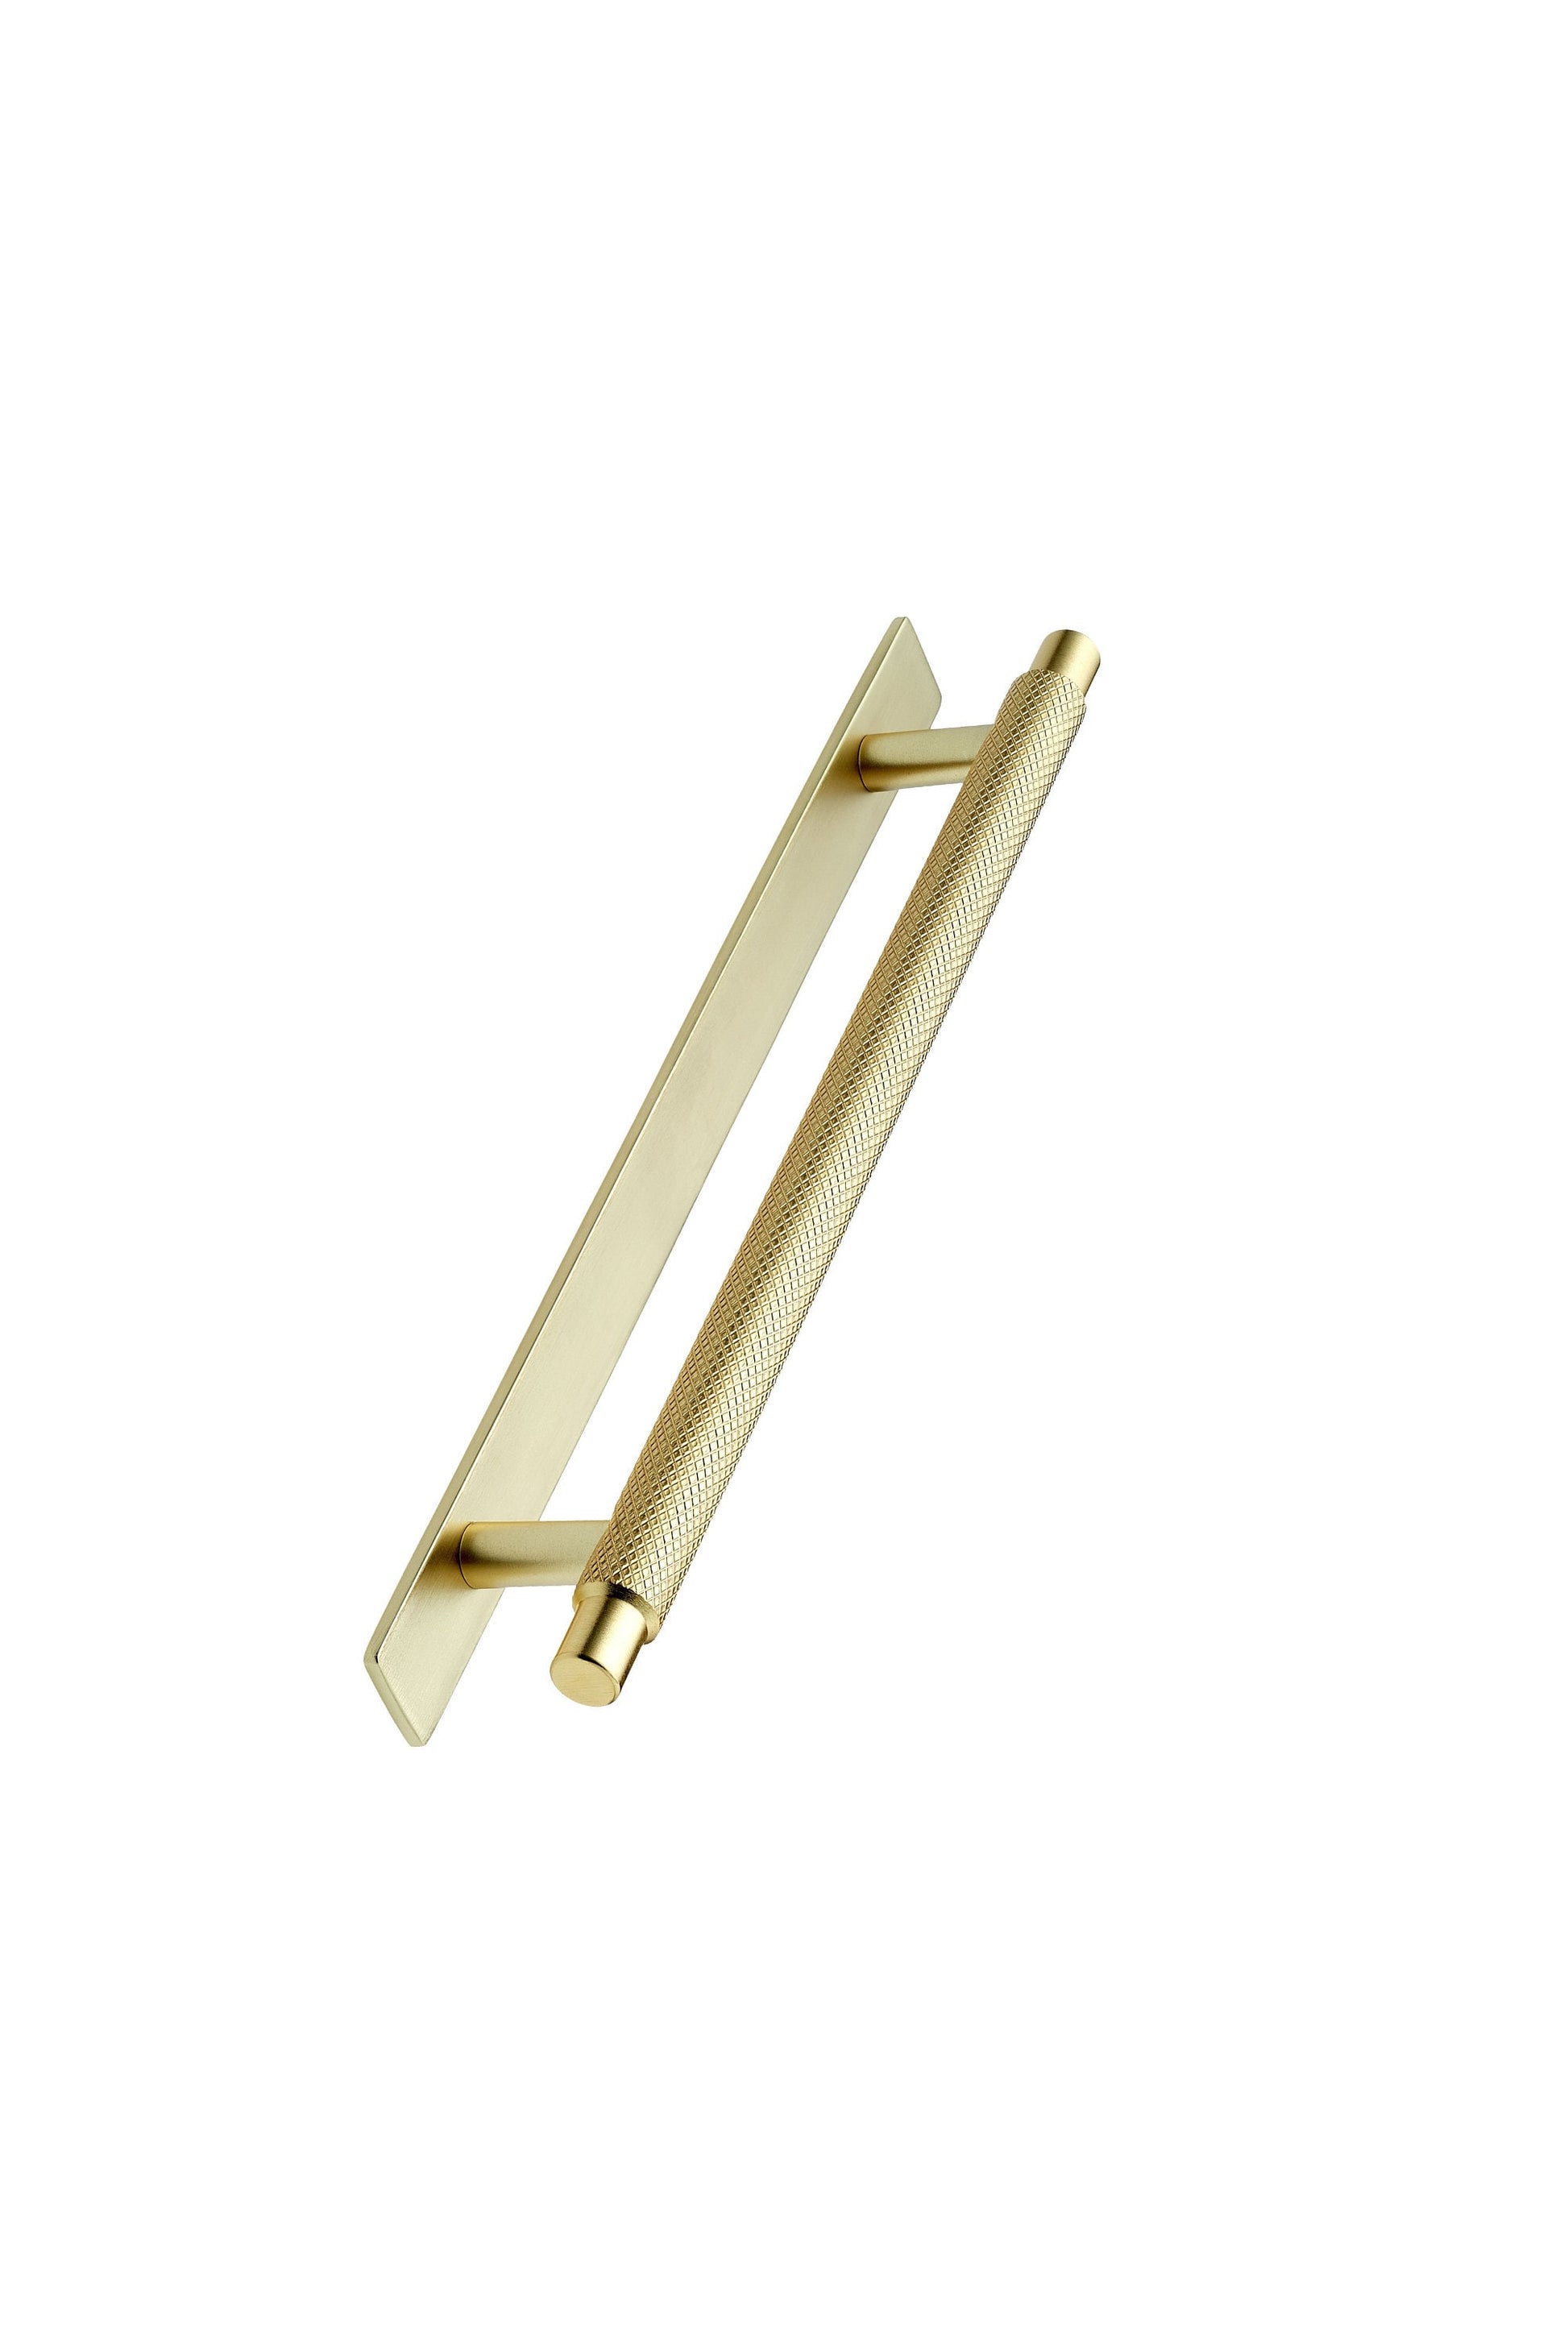 Furnipart Manor Knurled Handles & Knobs Gold